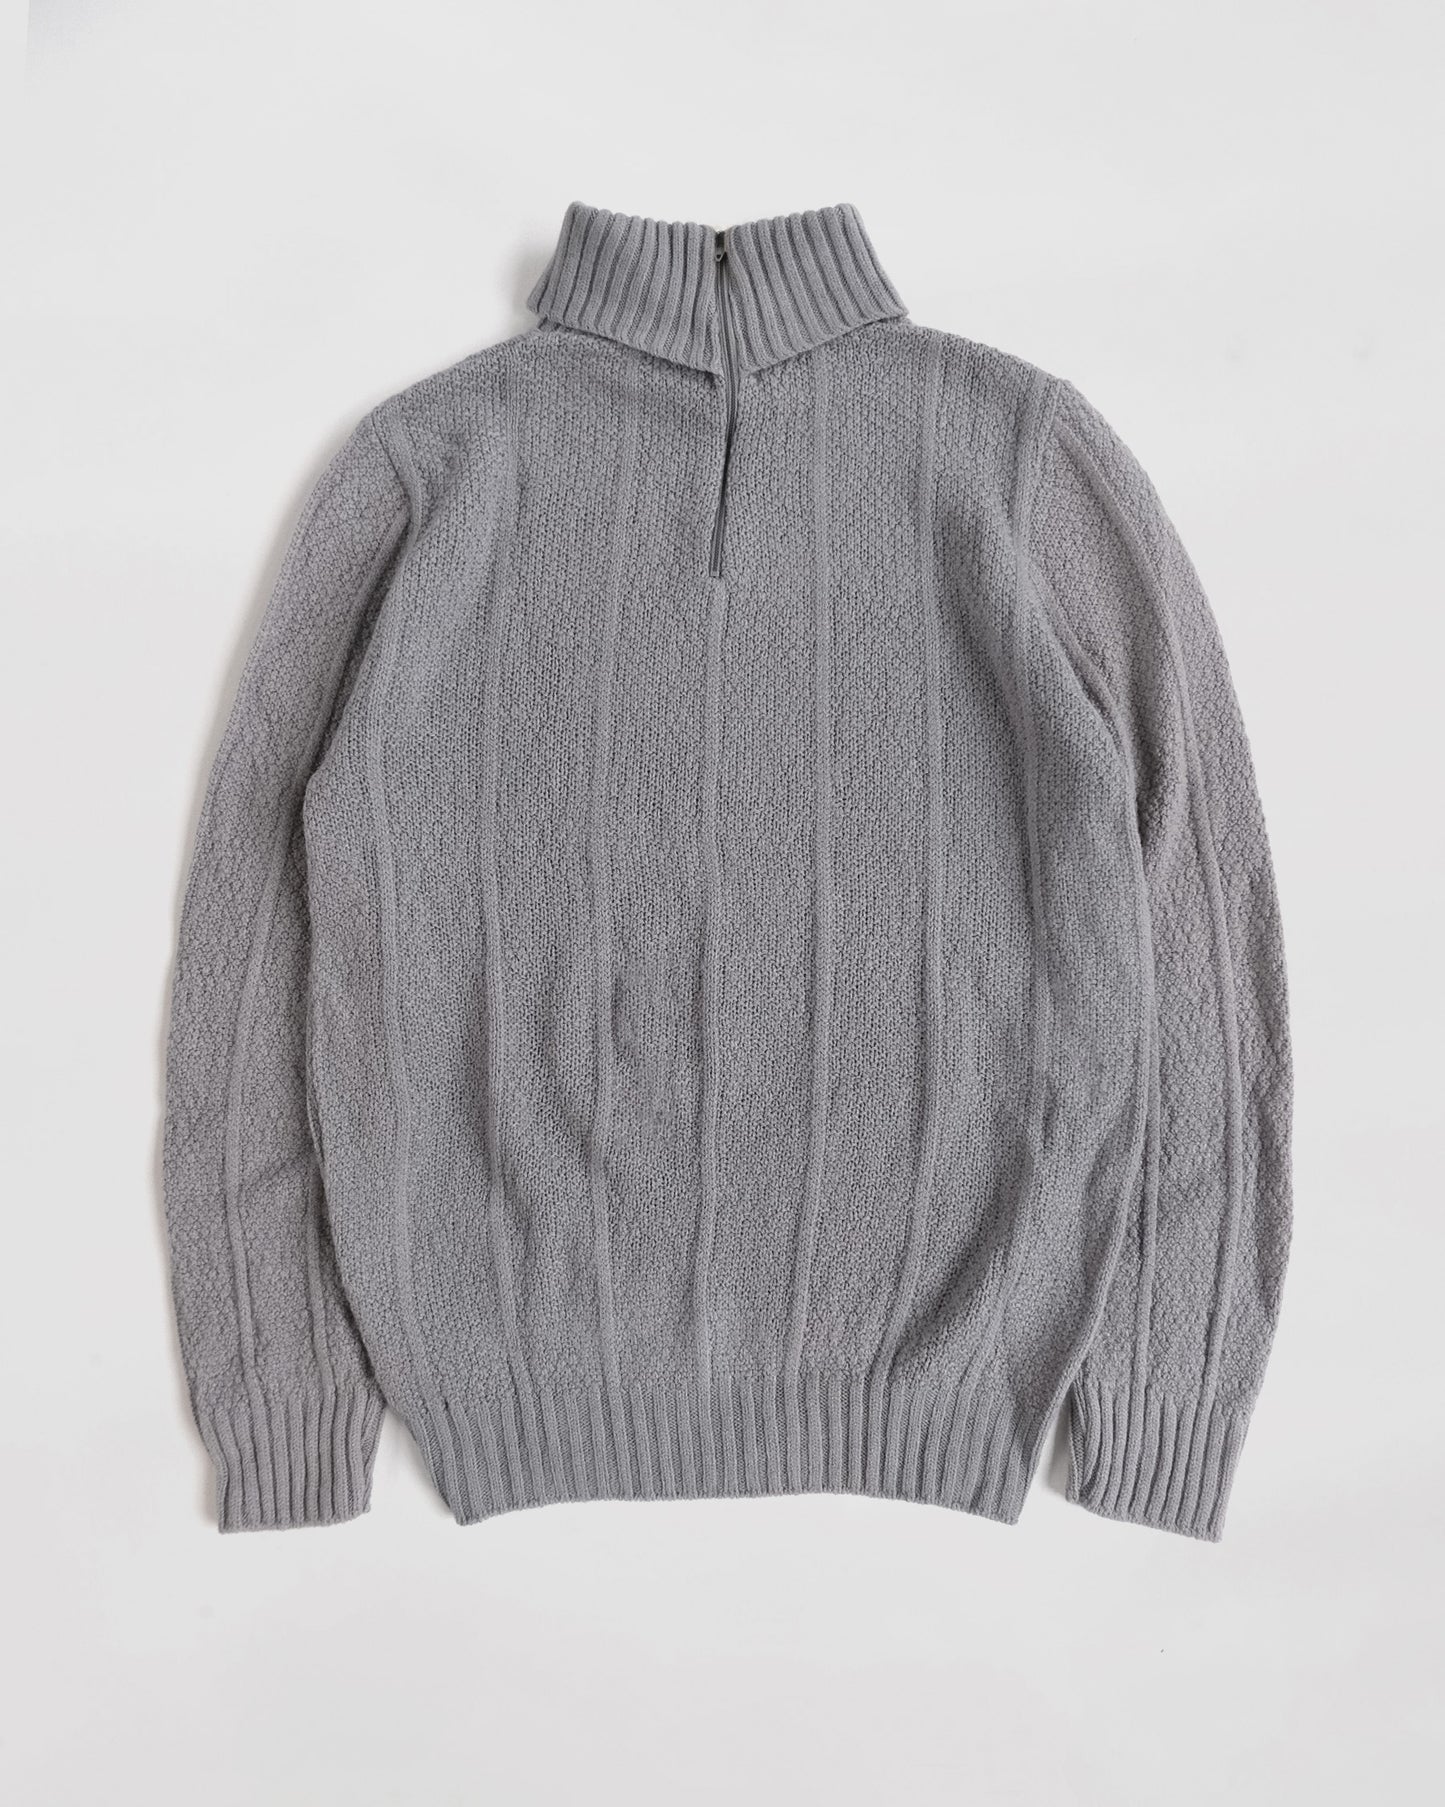 NOS Turtleneck with Back Zipper - Gray